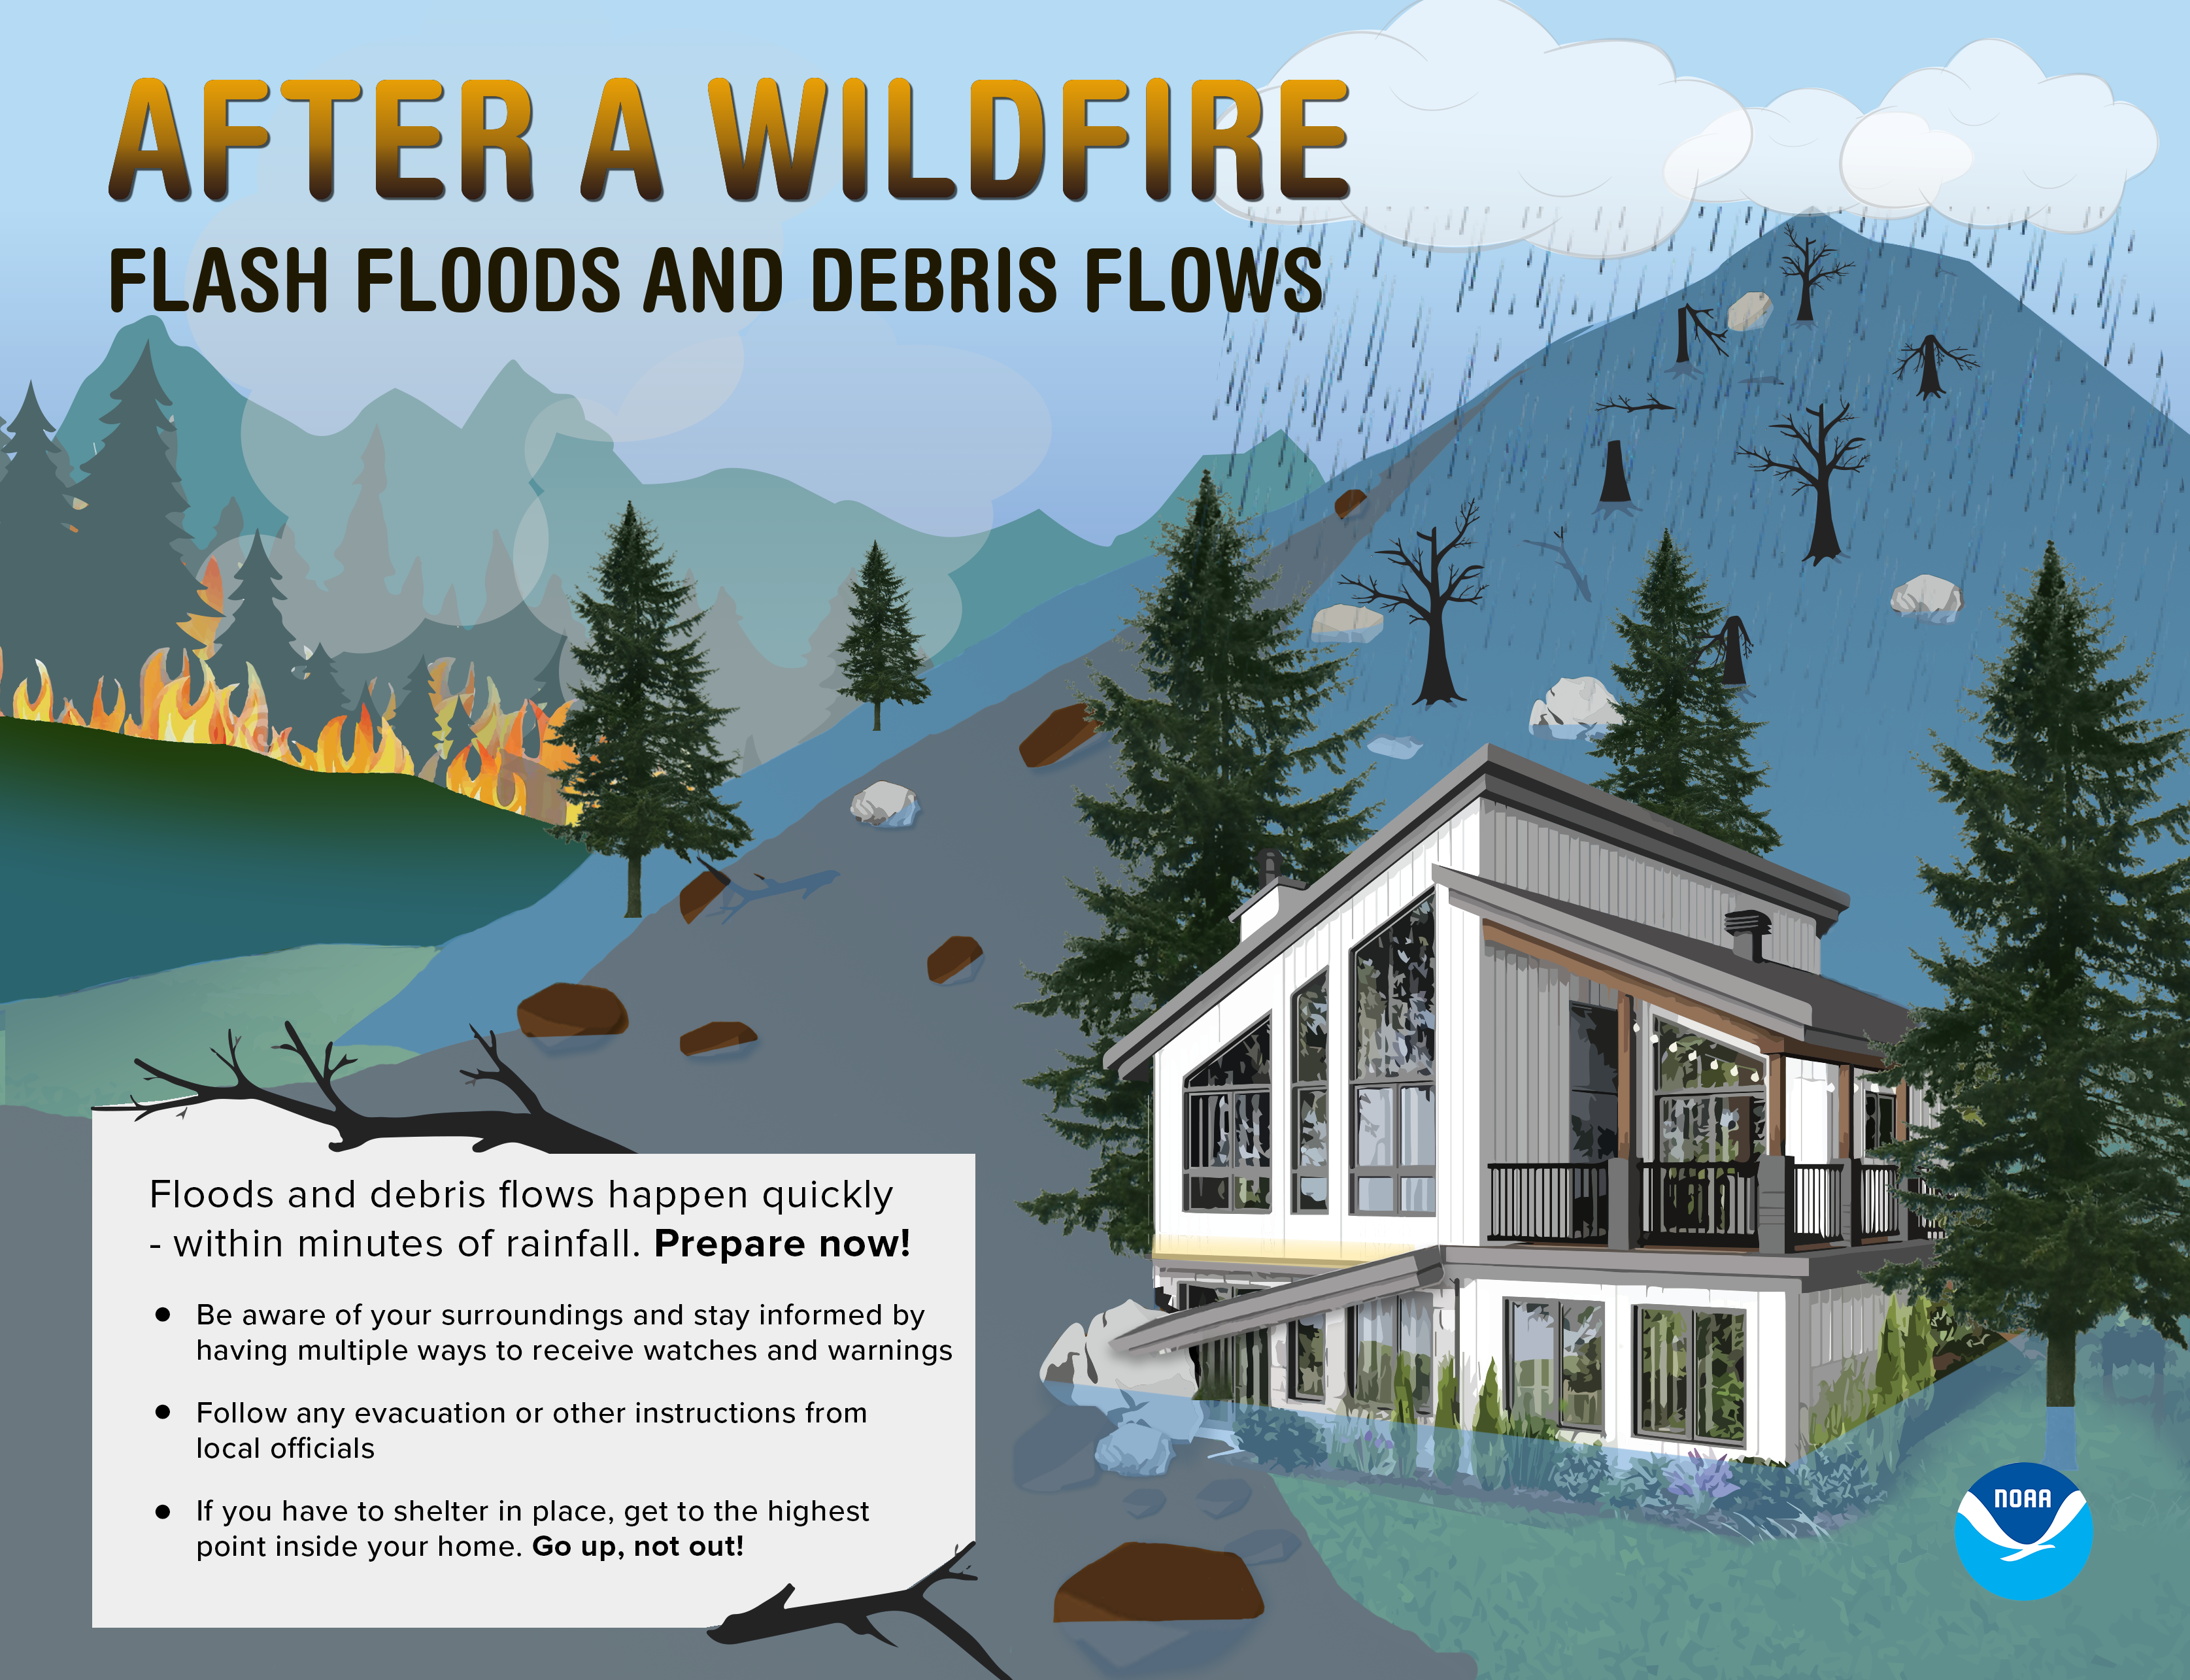 After a wildfire: flash floods and debris flows. Floods and debris flows happen quickly after rainfall. Prepare now! Be aware of your surroundings and stay informed by having multiple ways to receive watches and warnings. Follow any evacuation or other instructions from local officials. If you have to shelter in place, get to the highest point inside your home. Go up, not out!